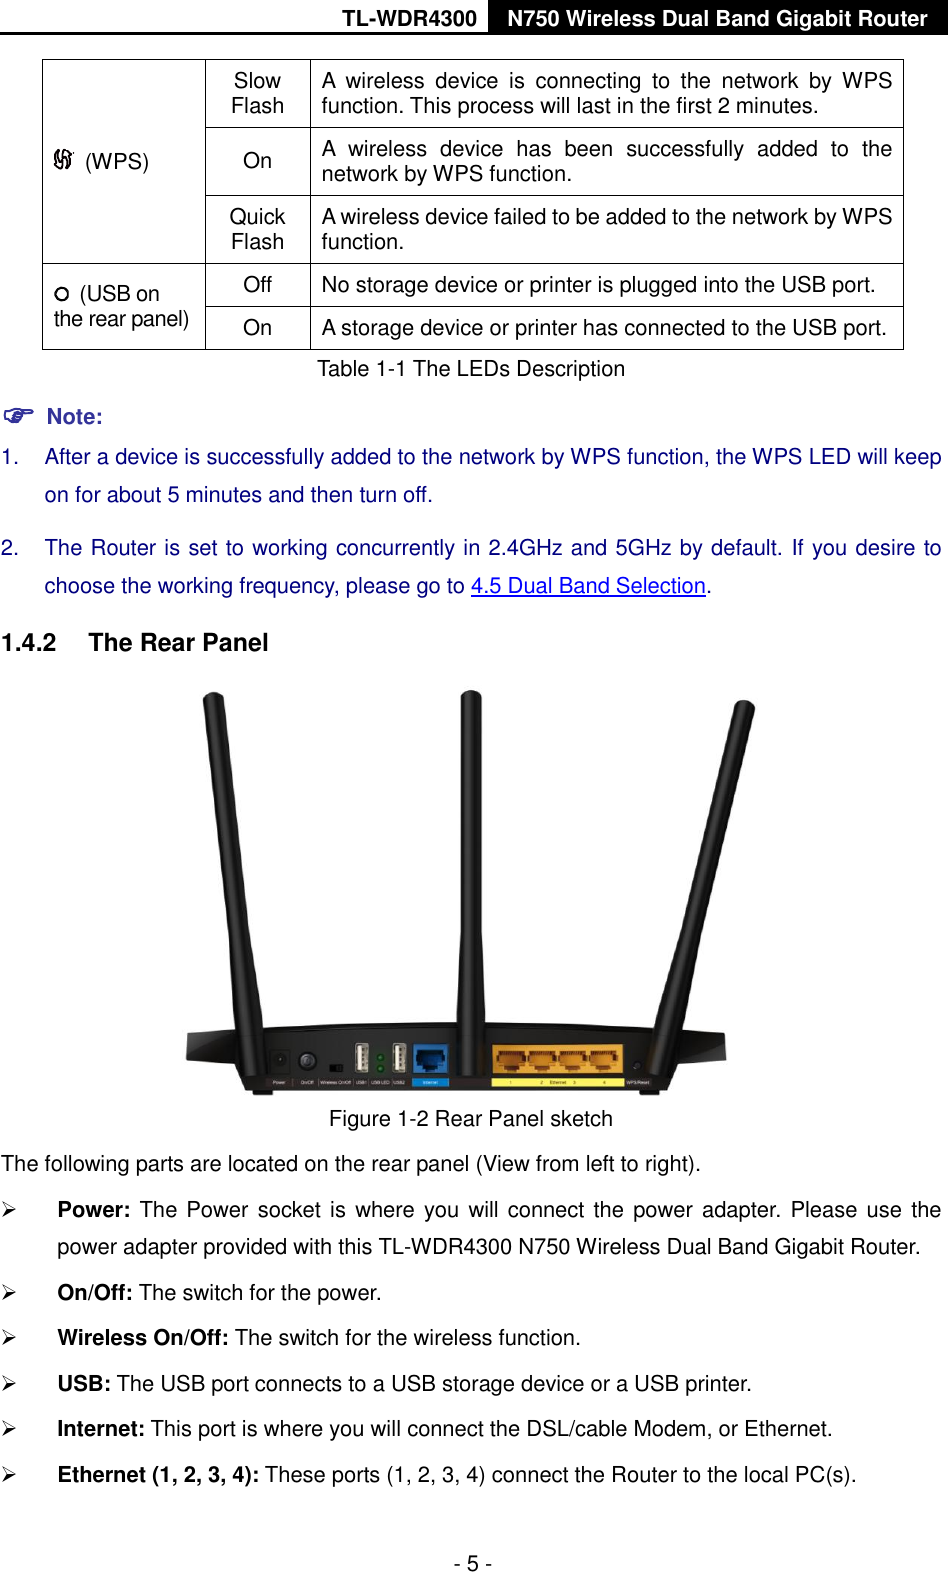 TL-WDR4300 N750 Wireless Dual Band Gigabit Router  - 5 -   (WPS) Slow Flash A  wireless  device  is  connecting  to  the  network  by  WPS function. This process will last in the first 2 minutes. On A  wireless  device  has  been  successfully  added  to  the network by WPS function.   Quick Flash A wireless device failed to be added to the network by WPS function.   (USB on the rear panel) Off No storage device or printer is plugged into the USB port. On A storage device or printer has connected to the USB port.   Table 1-1 The LEDs Description  Note: 1.  After a device is successfully added to the network by WPS function, the WPS LED will keep on for about 5 minutes and then turn off.   2.  The Router is set to working concurrently in 2.4GHz and 5GHz by default. If you desire to choose the working frequency, please go to 4.5 Dual Band Selection. 1.4.2  The Rear Panel  Figure 1-2 Rear Panel sketch The following parts are located on the rear panel (View from left to right).  Power: The Power socket is where you will connect the power adapter. Please use the power adapter provided with this TL-WDR4300 N750 Wireless Dual Band Gigabit Router.  On/Off: The switch for the power.  Wireless On/Off: The switch for the wireless function.  USB: The USB port connects to a USB storage device or a USB printer.  Internet: This port is where you will connect the DSL/cable Modem, or Ethernet.  Ethernet (1, 2, 3, 4): These ports (1, 2, 3, 4) connect the Router to the local PC(s). 